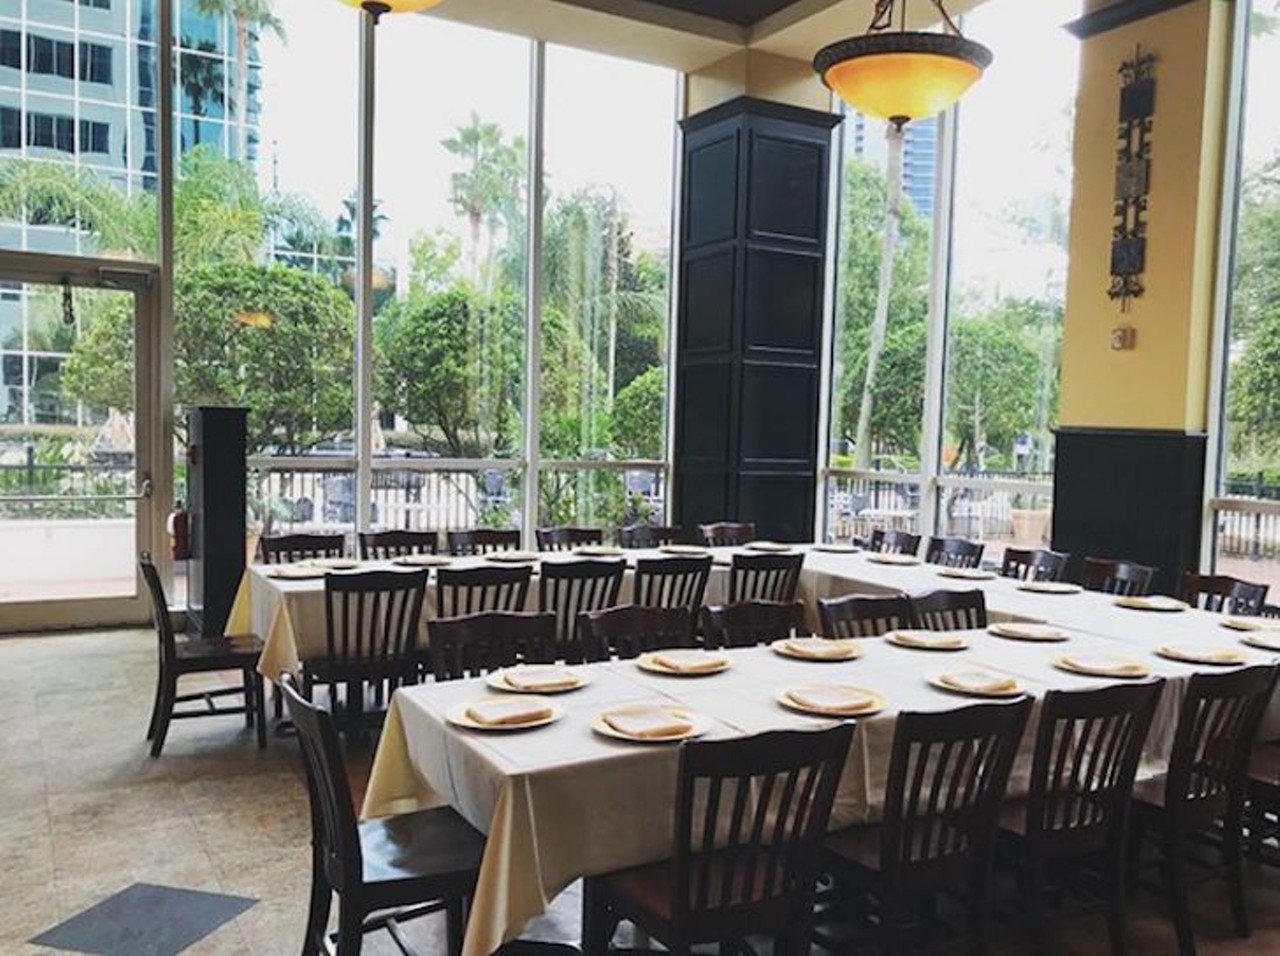 310 Lakeside
301 E. Pine St. | 407-373-0310
Located right across the street from Lake Eola, 310 Lakeside offers a high-quality menu with a high-quality view. Sit outside on the terrace and listen to the sounds of downtown Orlando and the Lake Eola fountain. Whether you&#146;re in the mood for munching on some tasty appetizers, biting into a juicy entree, or downing a few selections from the impressive wine list, 310 allows you to kick back in a more sophisticated environment.
Photo via 310events/Instagram